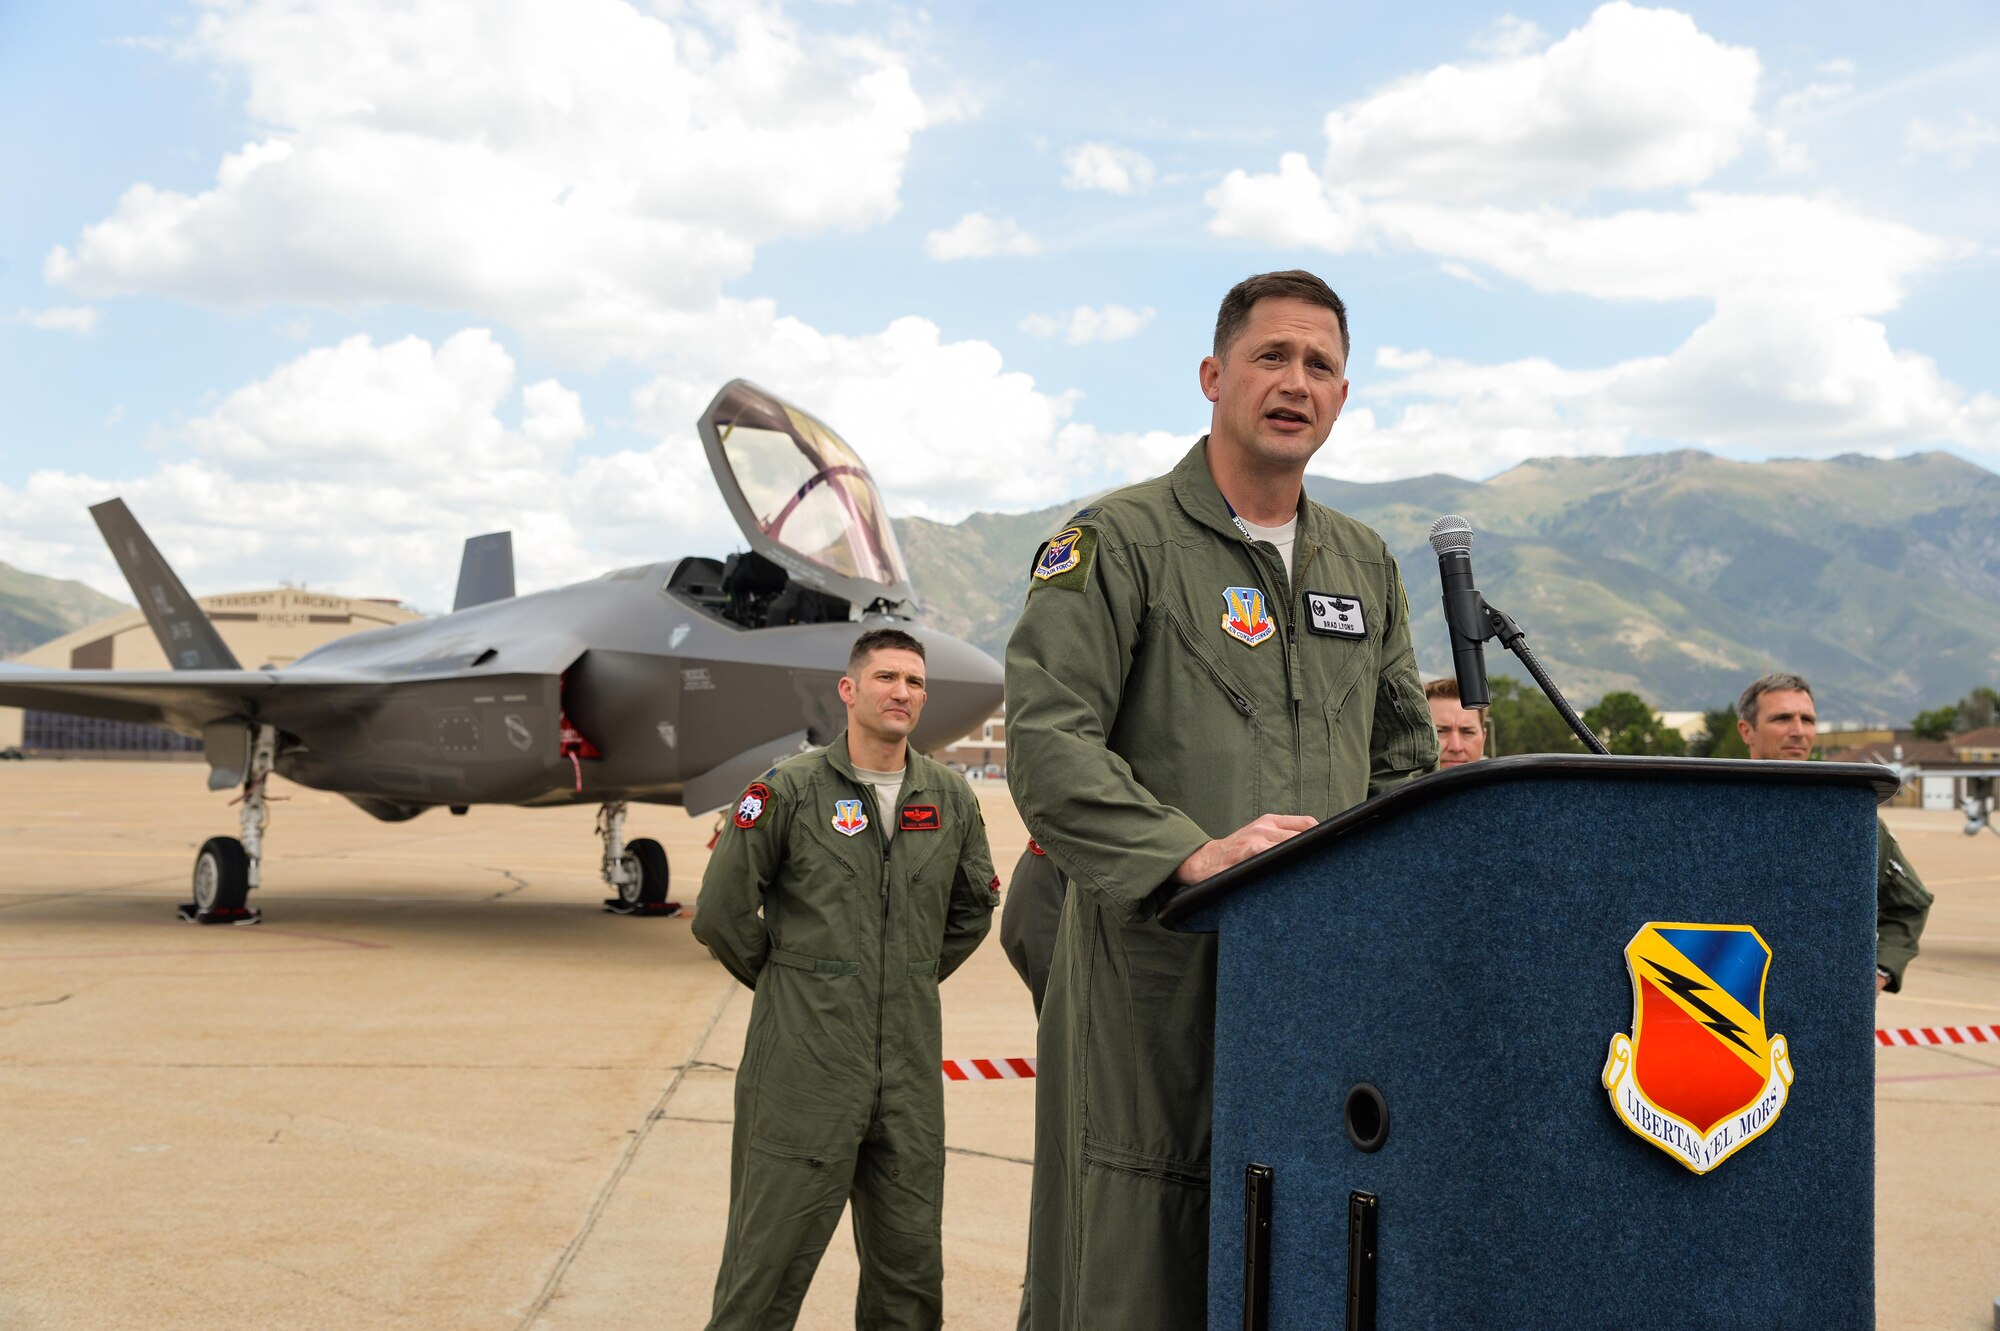 Col. David Lyons, 388th Fighter Wing commander, speaks to Airmen, civic leaders and media after delivering an operational F-35A Lightning II aircraft to Hill Air Force Base, Utah, Sept. 2, 2015. Lyons, along with Lt. Col. Yosef Morris, 34th Fighter Squadron director of operations, delivered the first two jets, known as AF-77 and AF-78, at approximately 1 p.m. MDT after a 90-minute flight from the F-35 production facility in Fort Worth, Texas. These aircraft are the first two of up to 72 jets that will be assigned to both the active-duty 388th and Reserve 419th Fighter Wings at Hill. (U.S. Air Force photo by Ron Bradshaw)